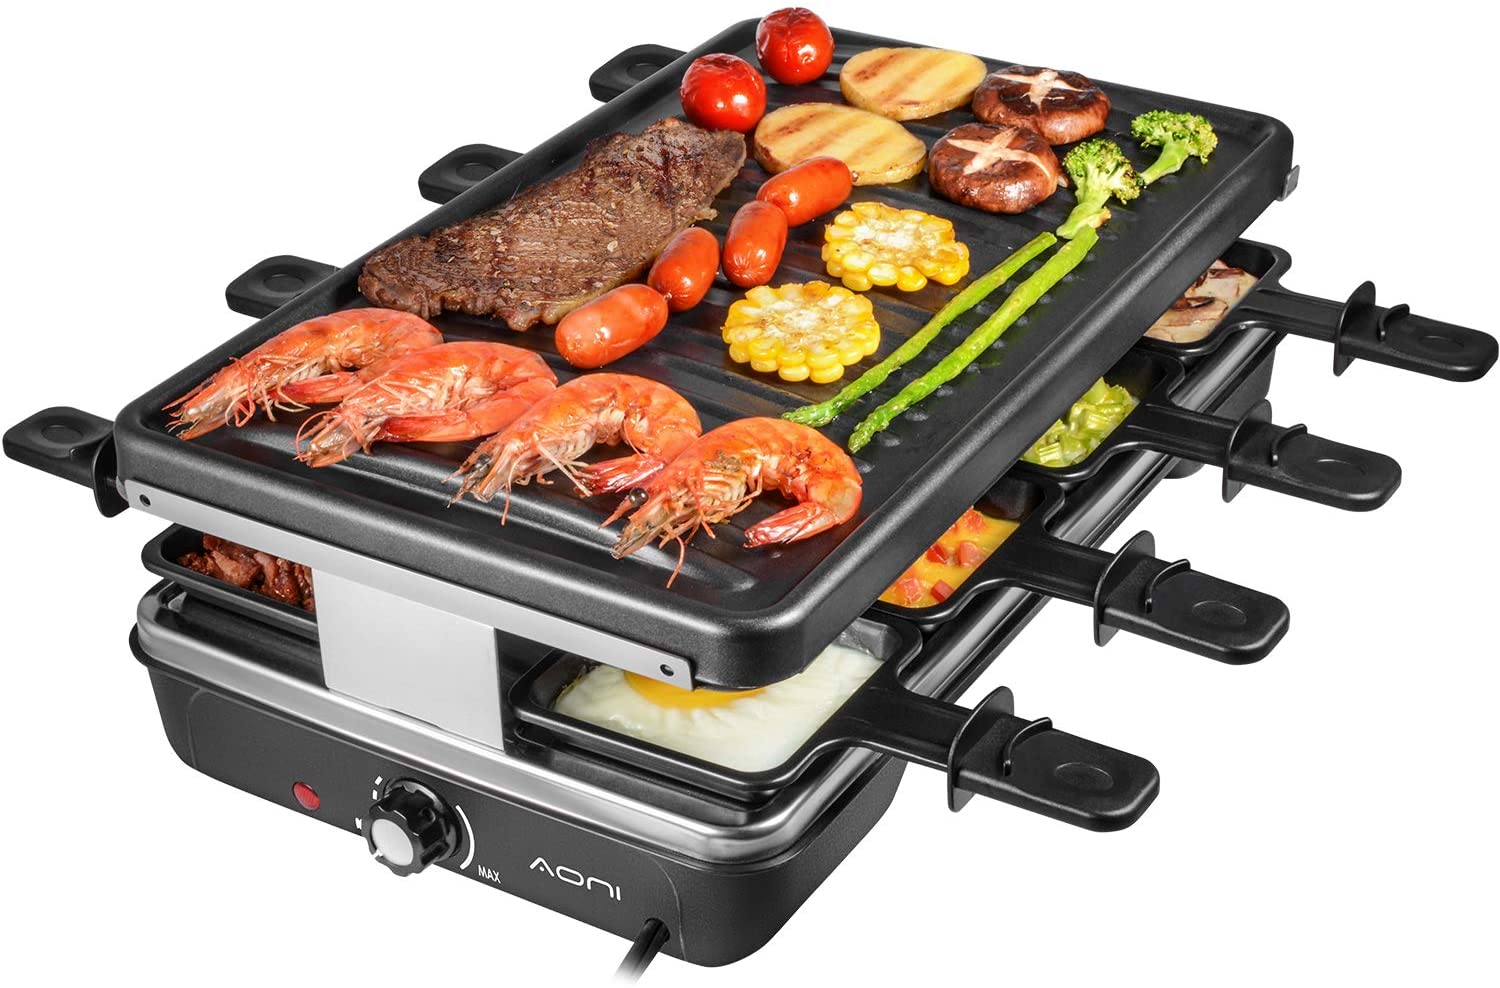 AONI Electric Raclette Grill, Smokeless Grill, Electric BBQ Grill with Non-Stick Grill Surface, 1200 W Temperature Control, Dishwasher Safe, For The Whole Family